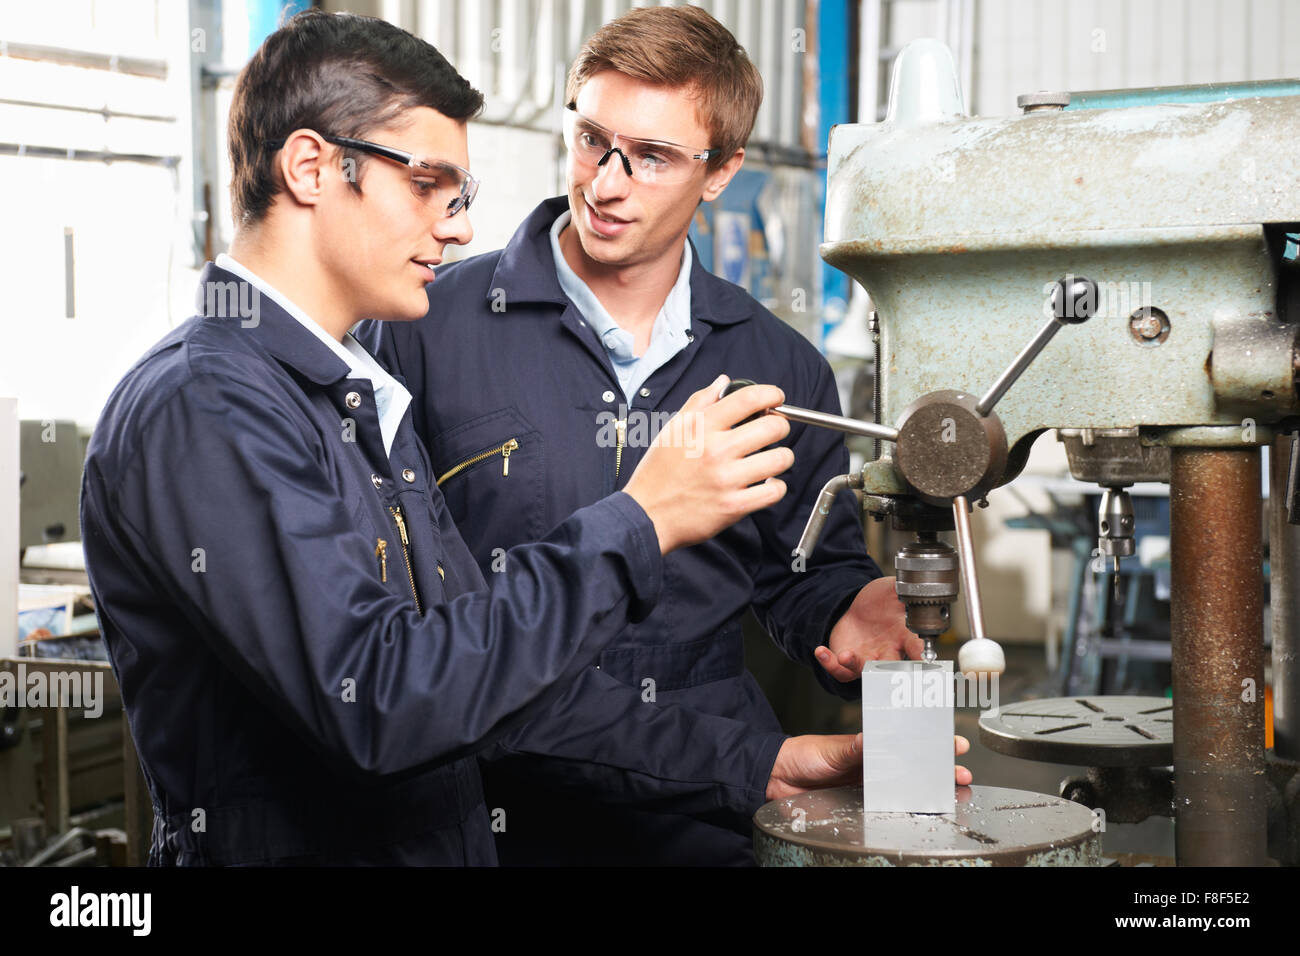 Engineer And Apprentice Using Machinery In Factory Stock Photo